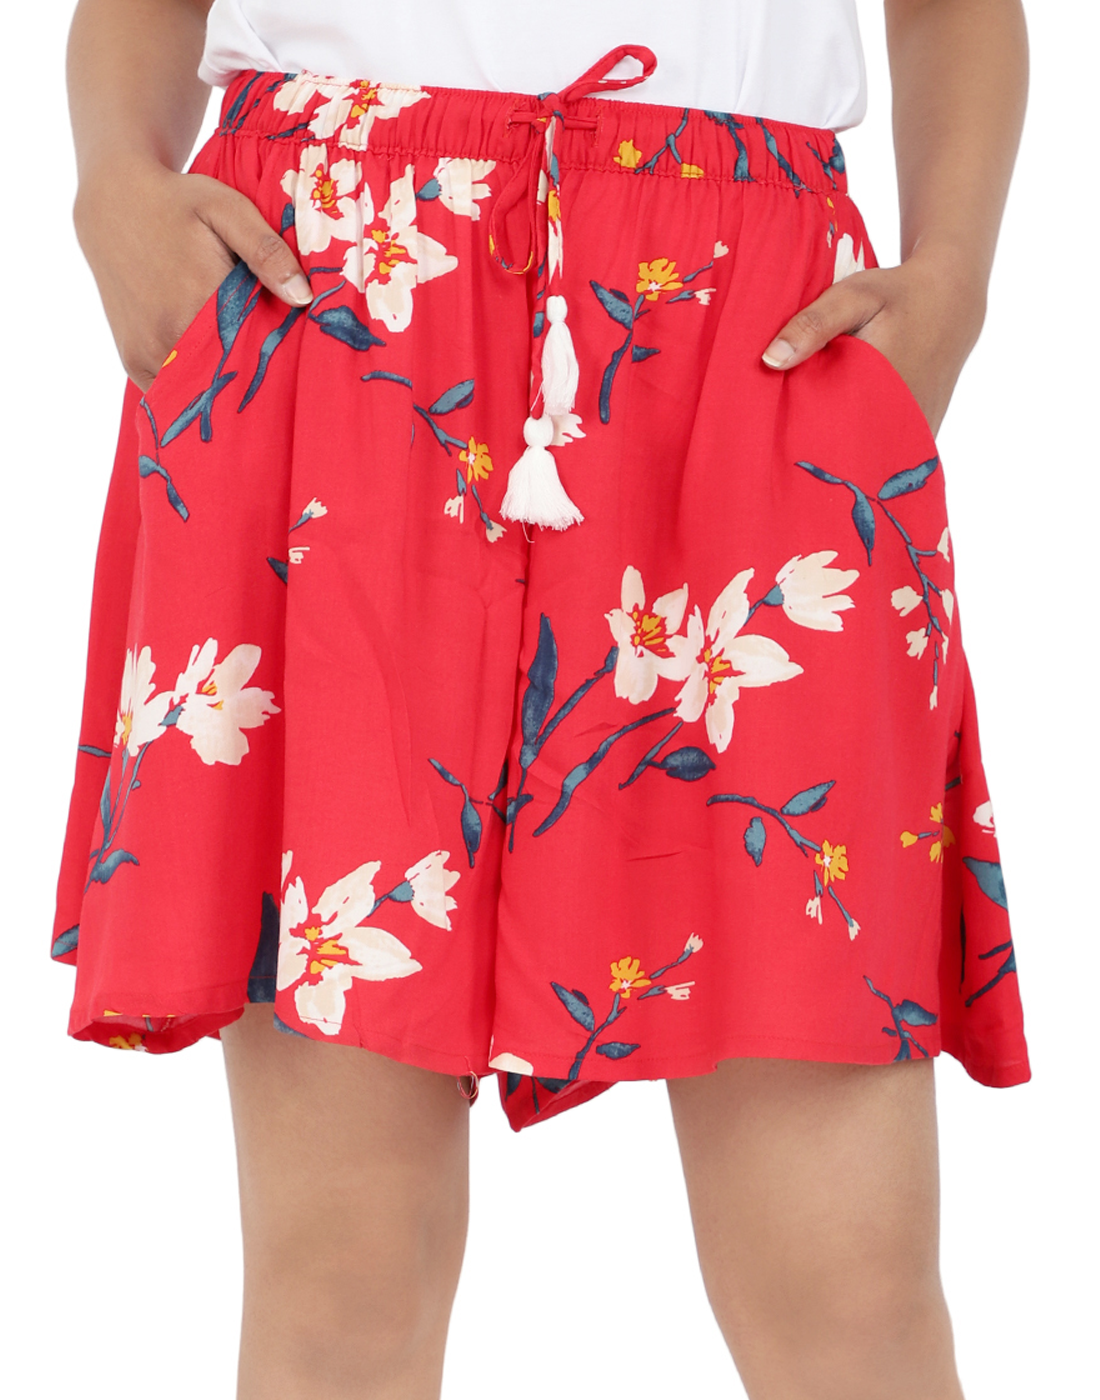 Culotte Shorts for Women-Red Floral